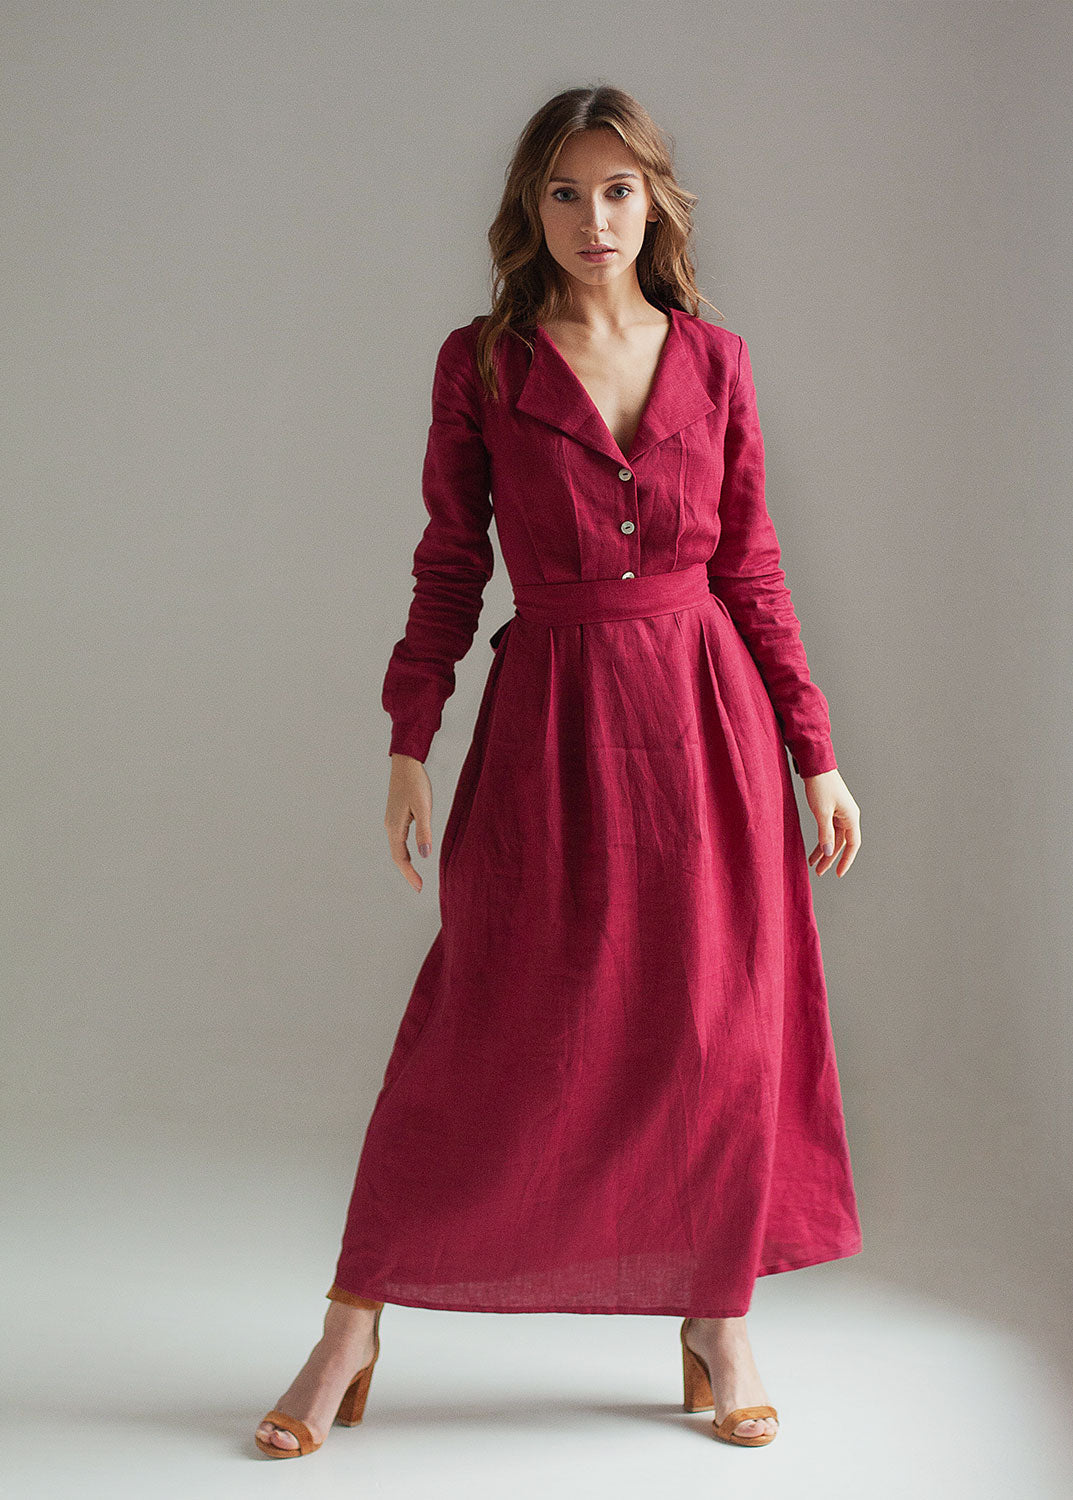 "Tristan" Burgundy Maxi Dress with sleeves